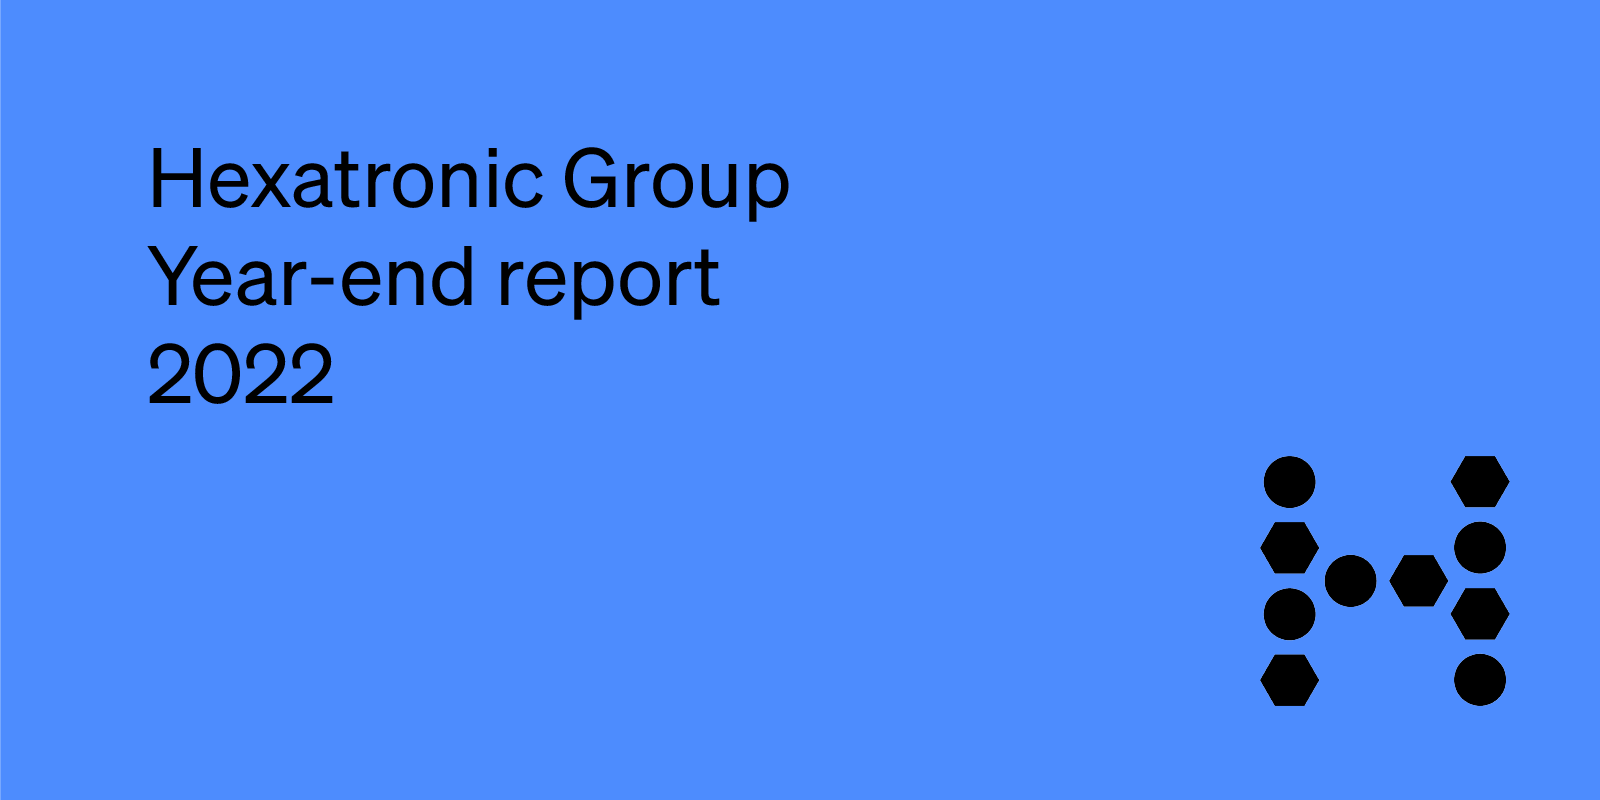 Hexatronic Group presents year-end report 2022